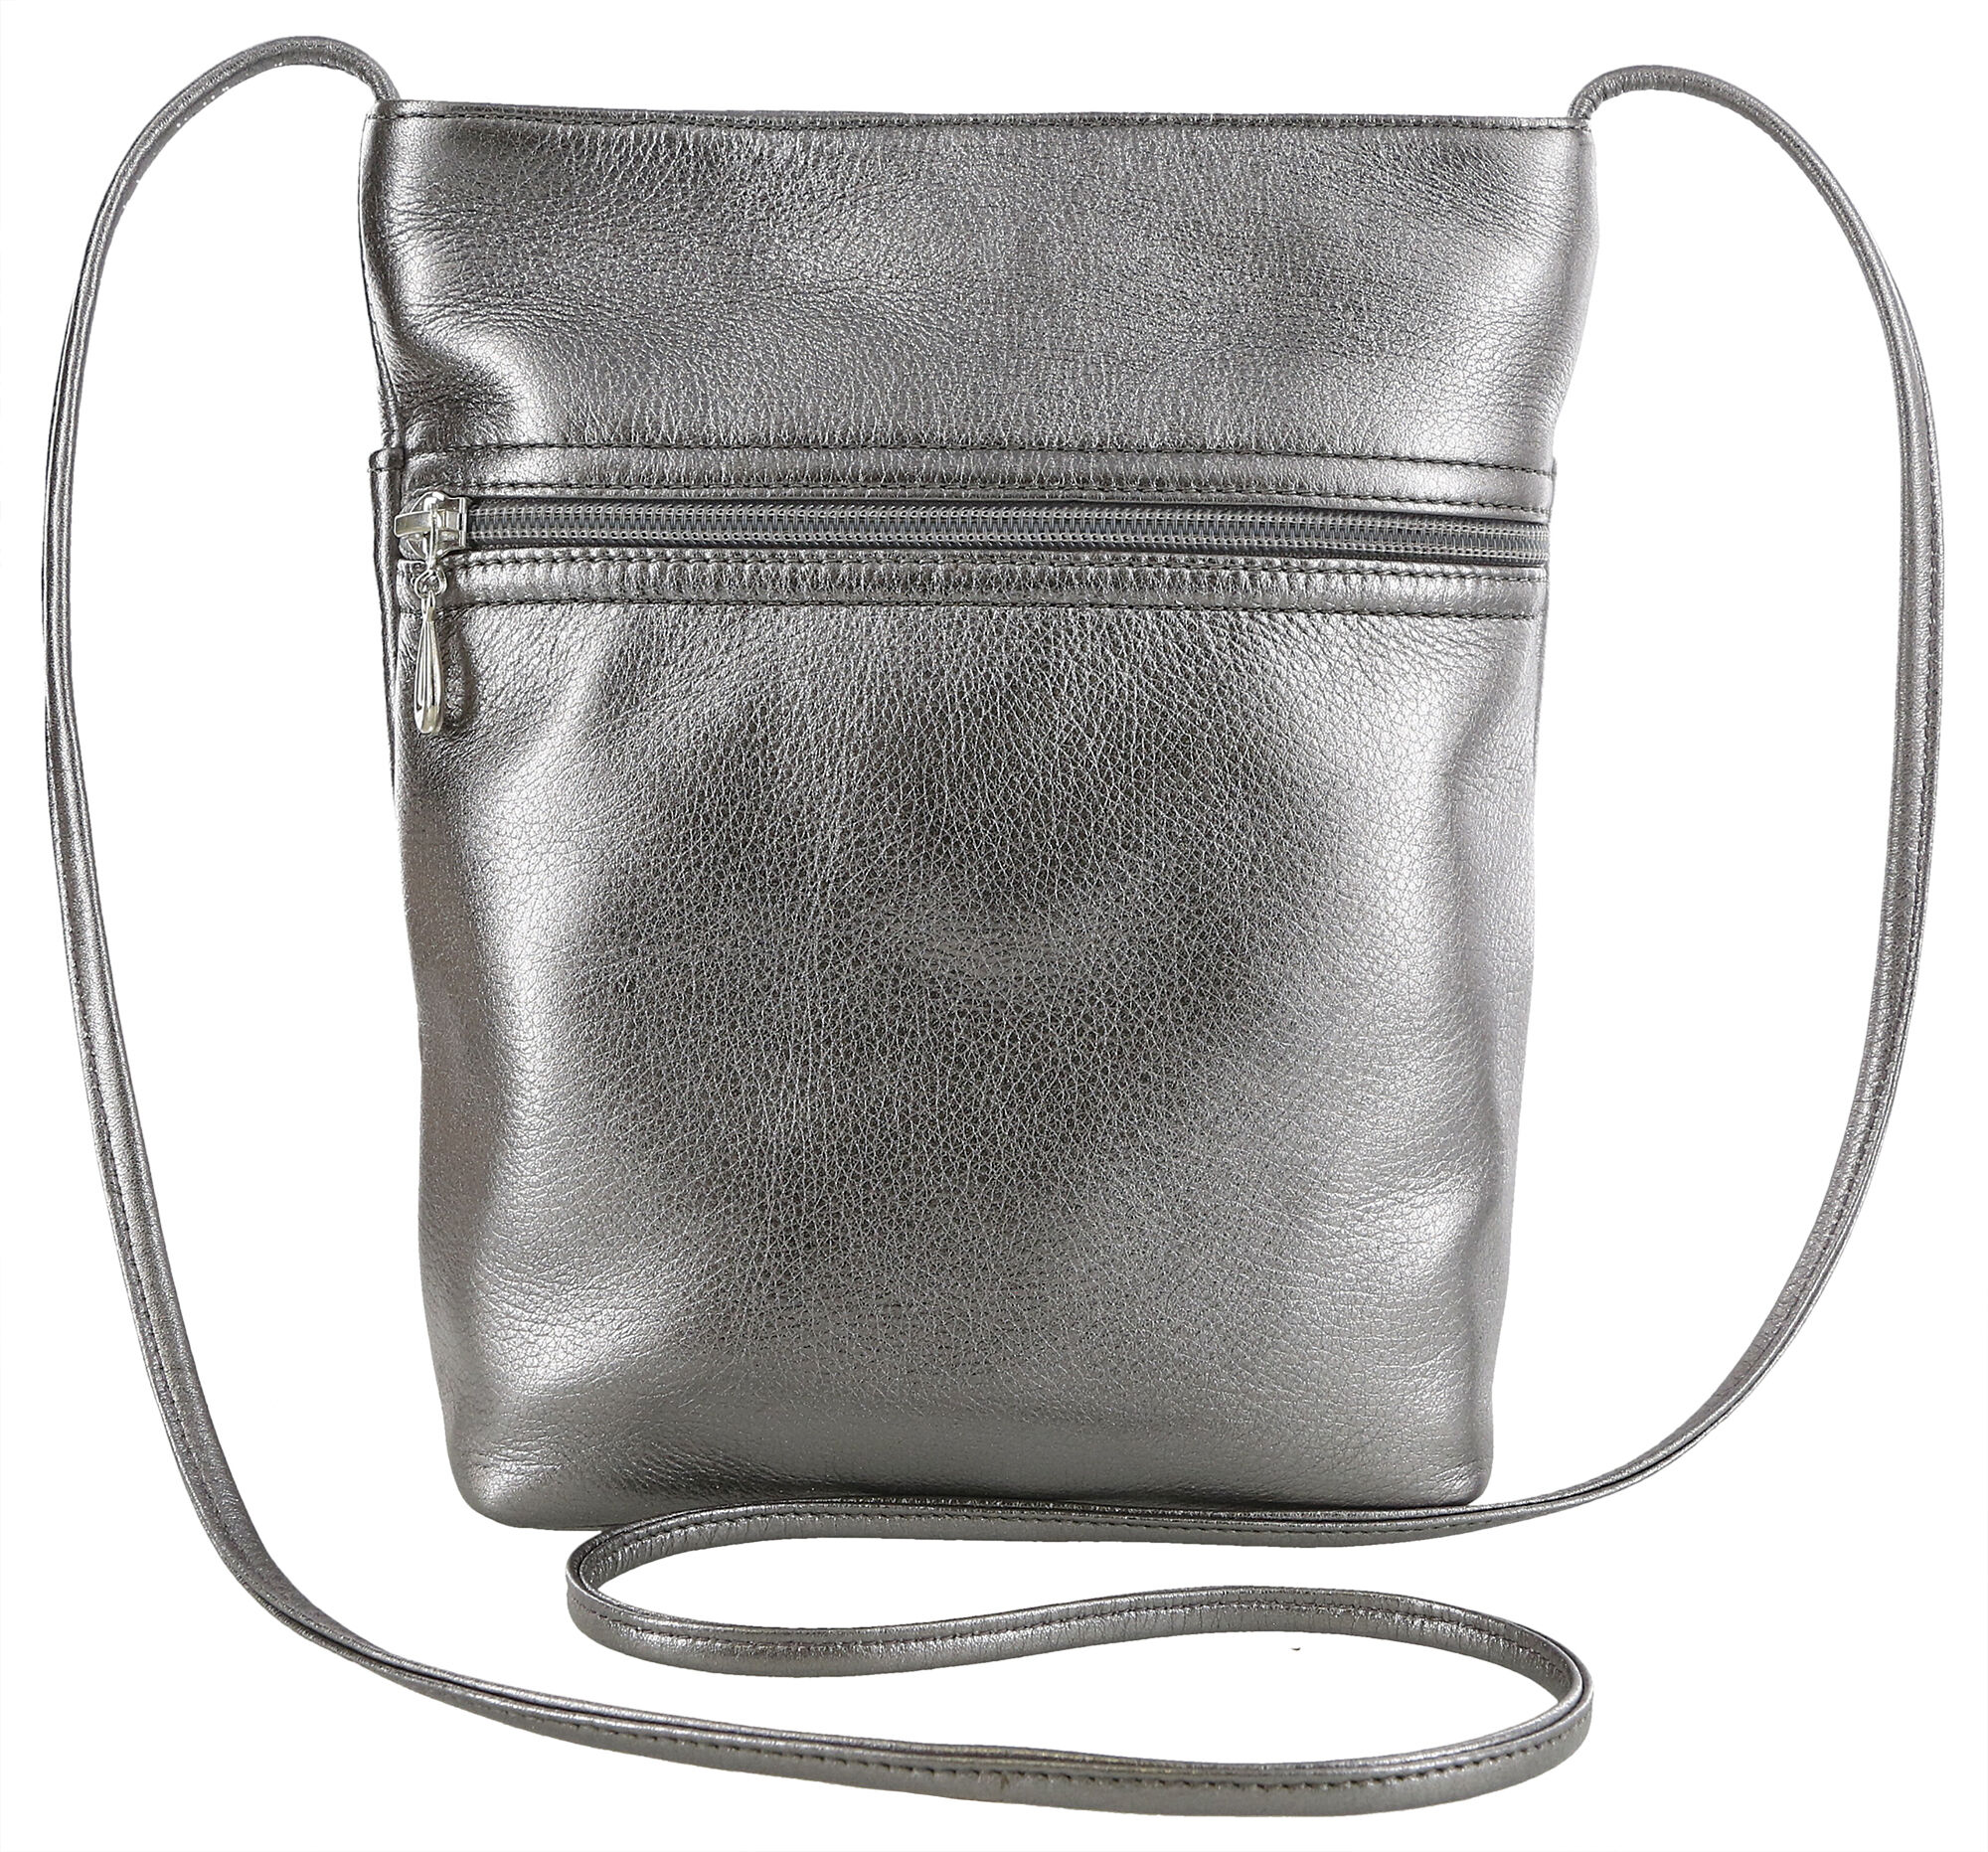 Metallic Purses Are Trending for Spring, and Amazon Has Under-$40 Styles